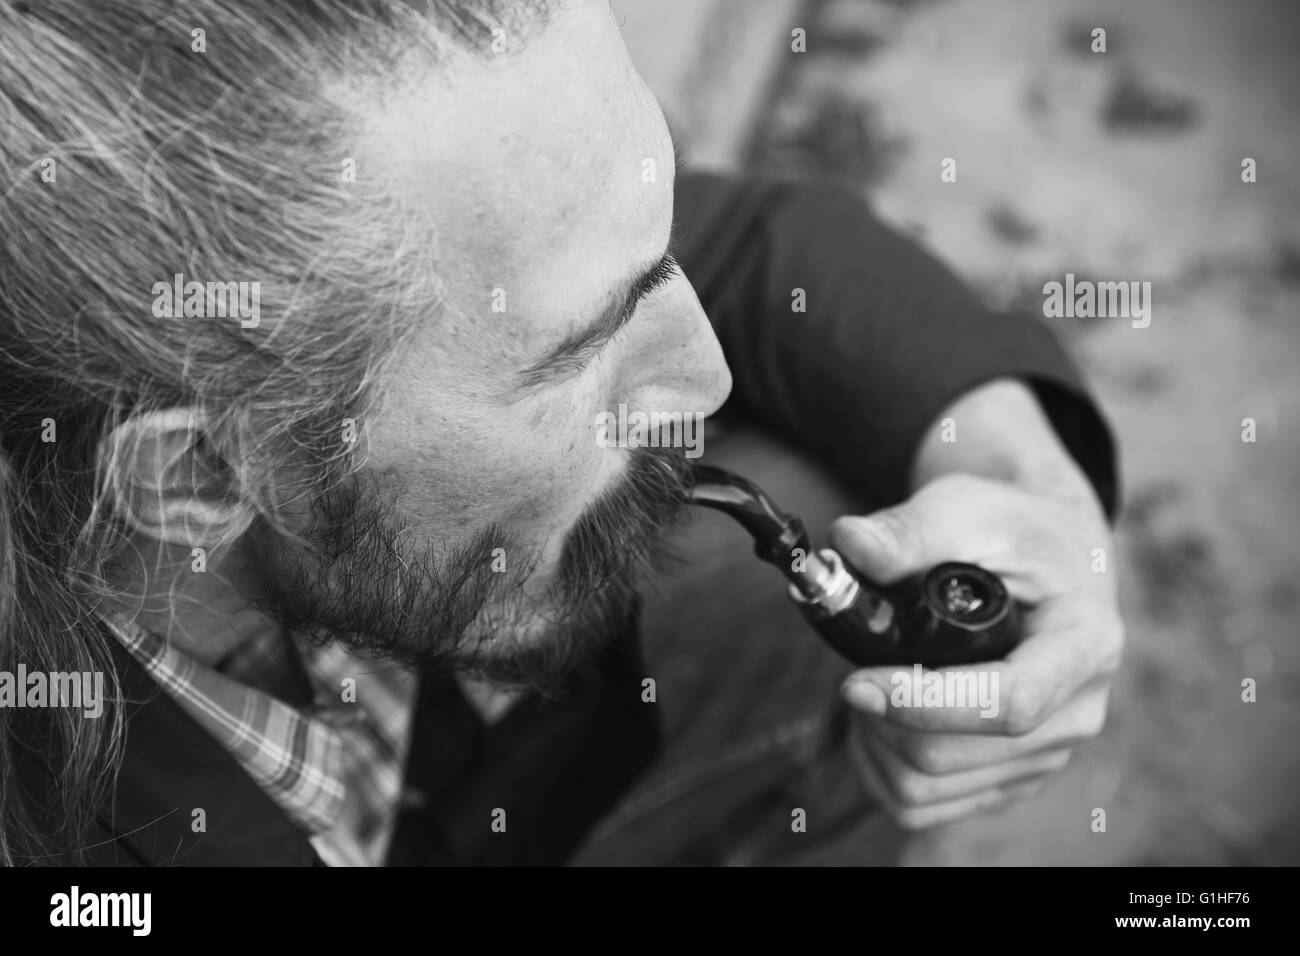 Man smoking pipe, black and white photo with selective focus Stock Photo